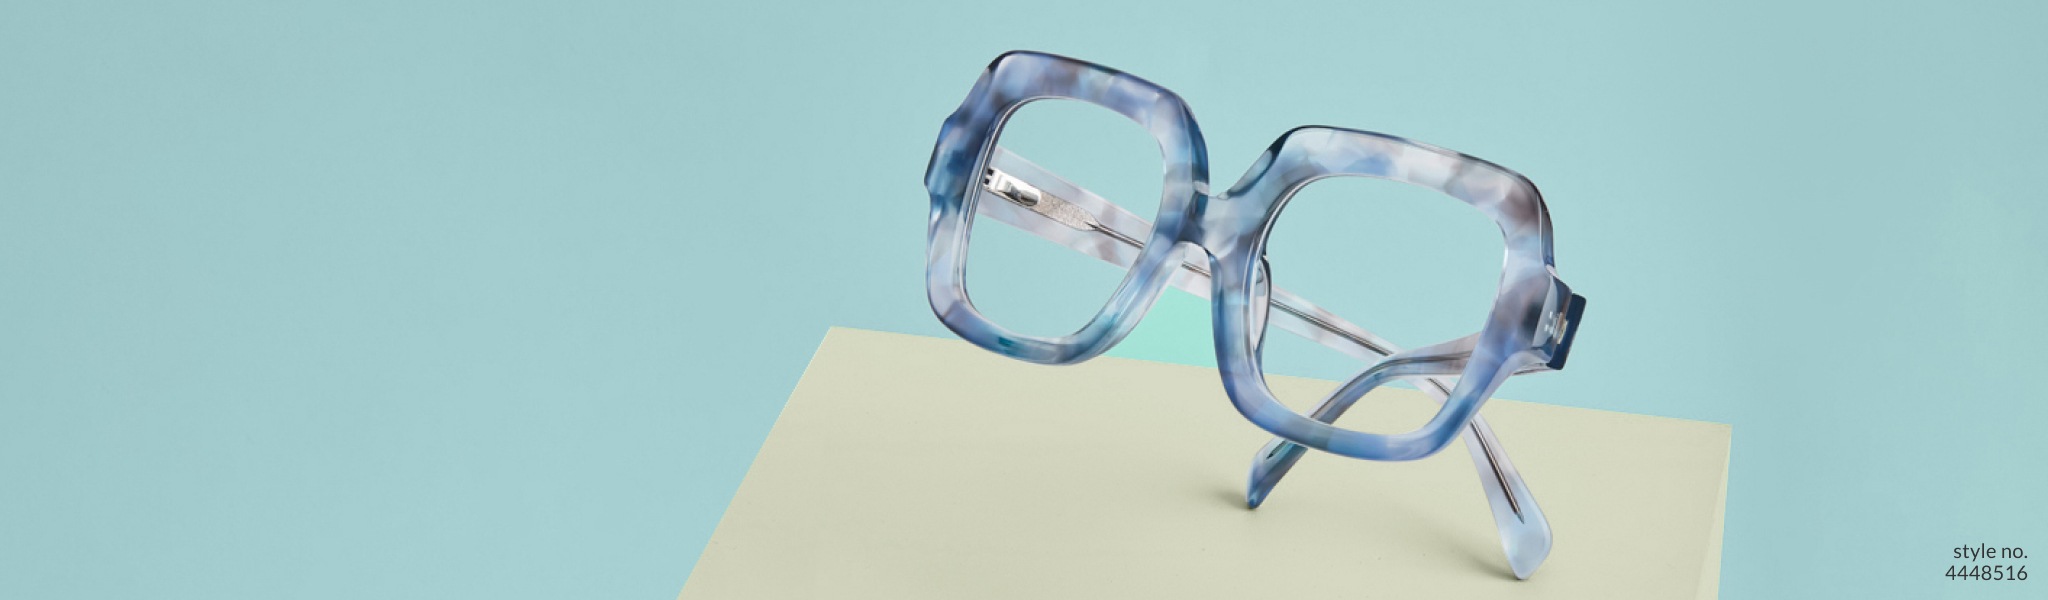 Image of Zenni square patterned glasses #4448516.